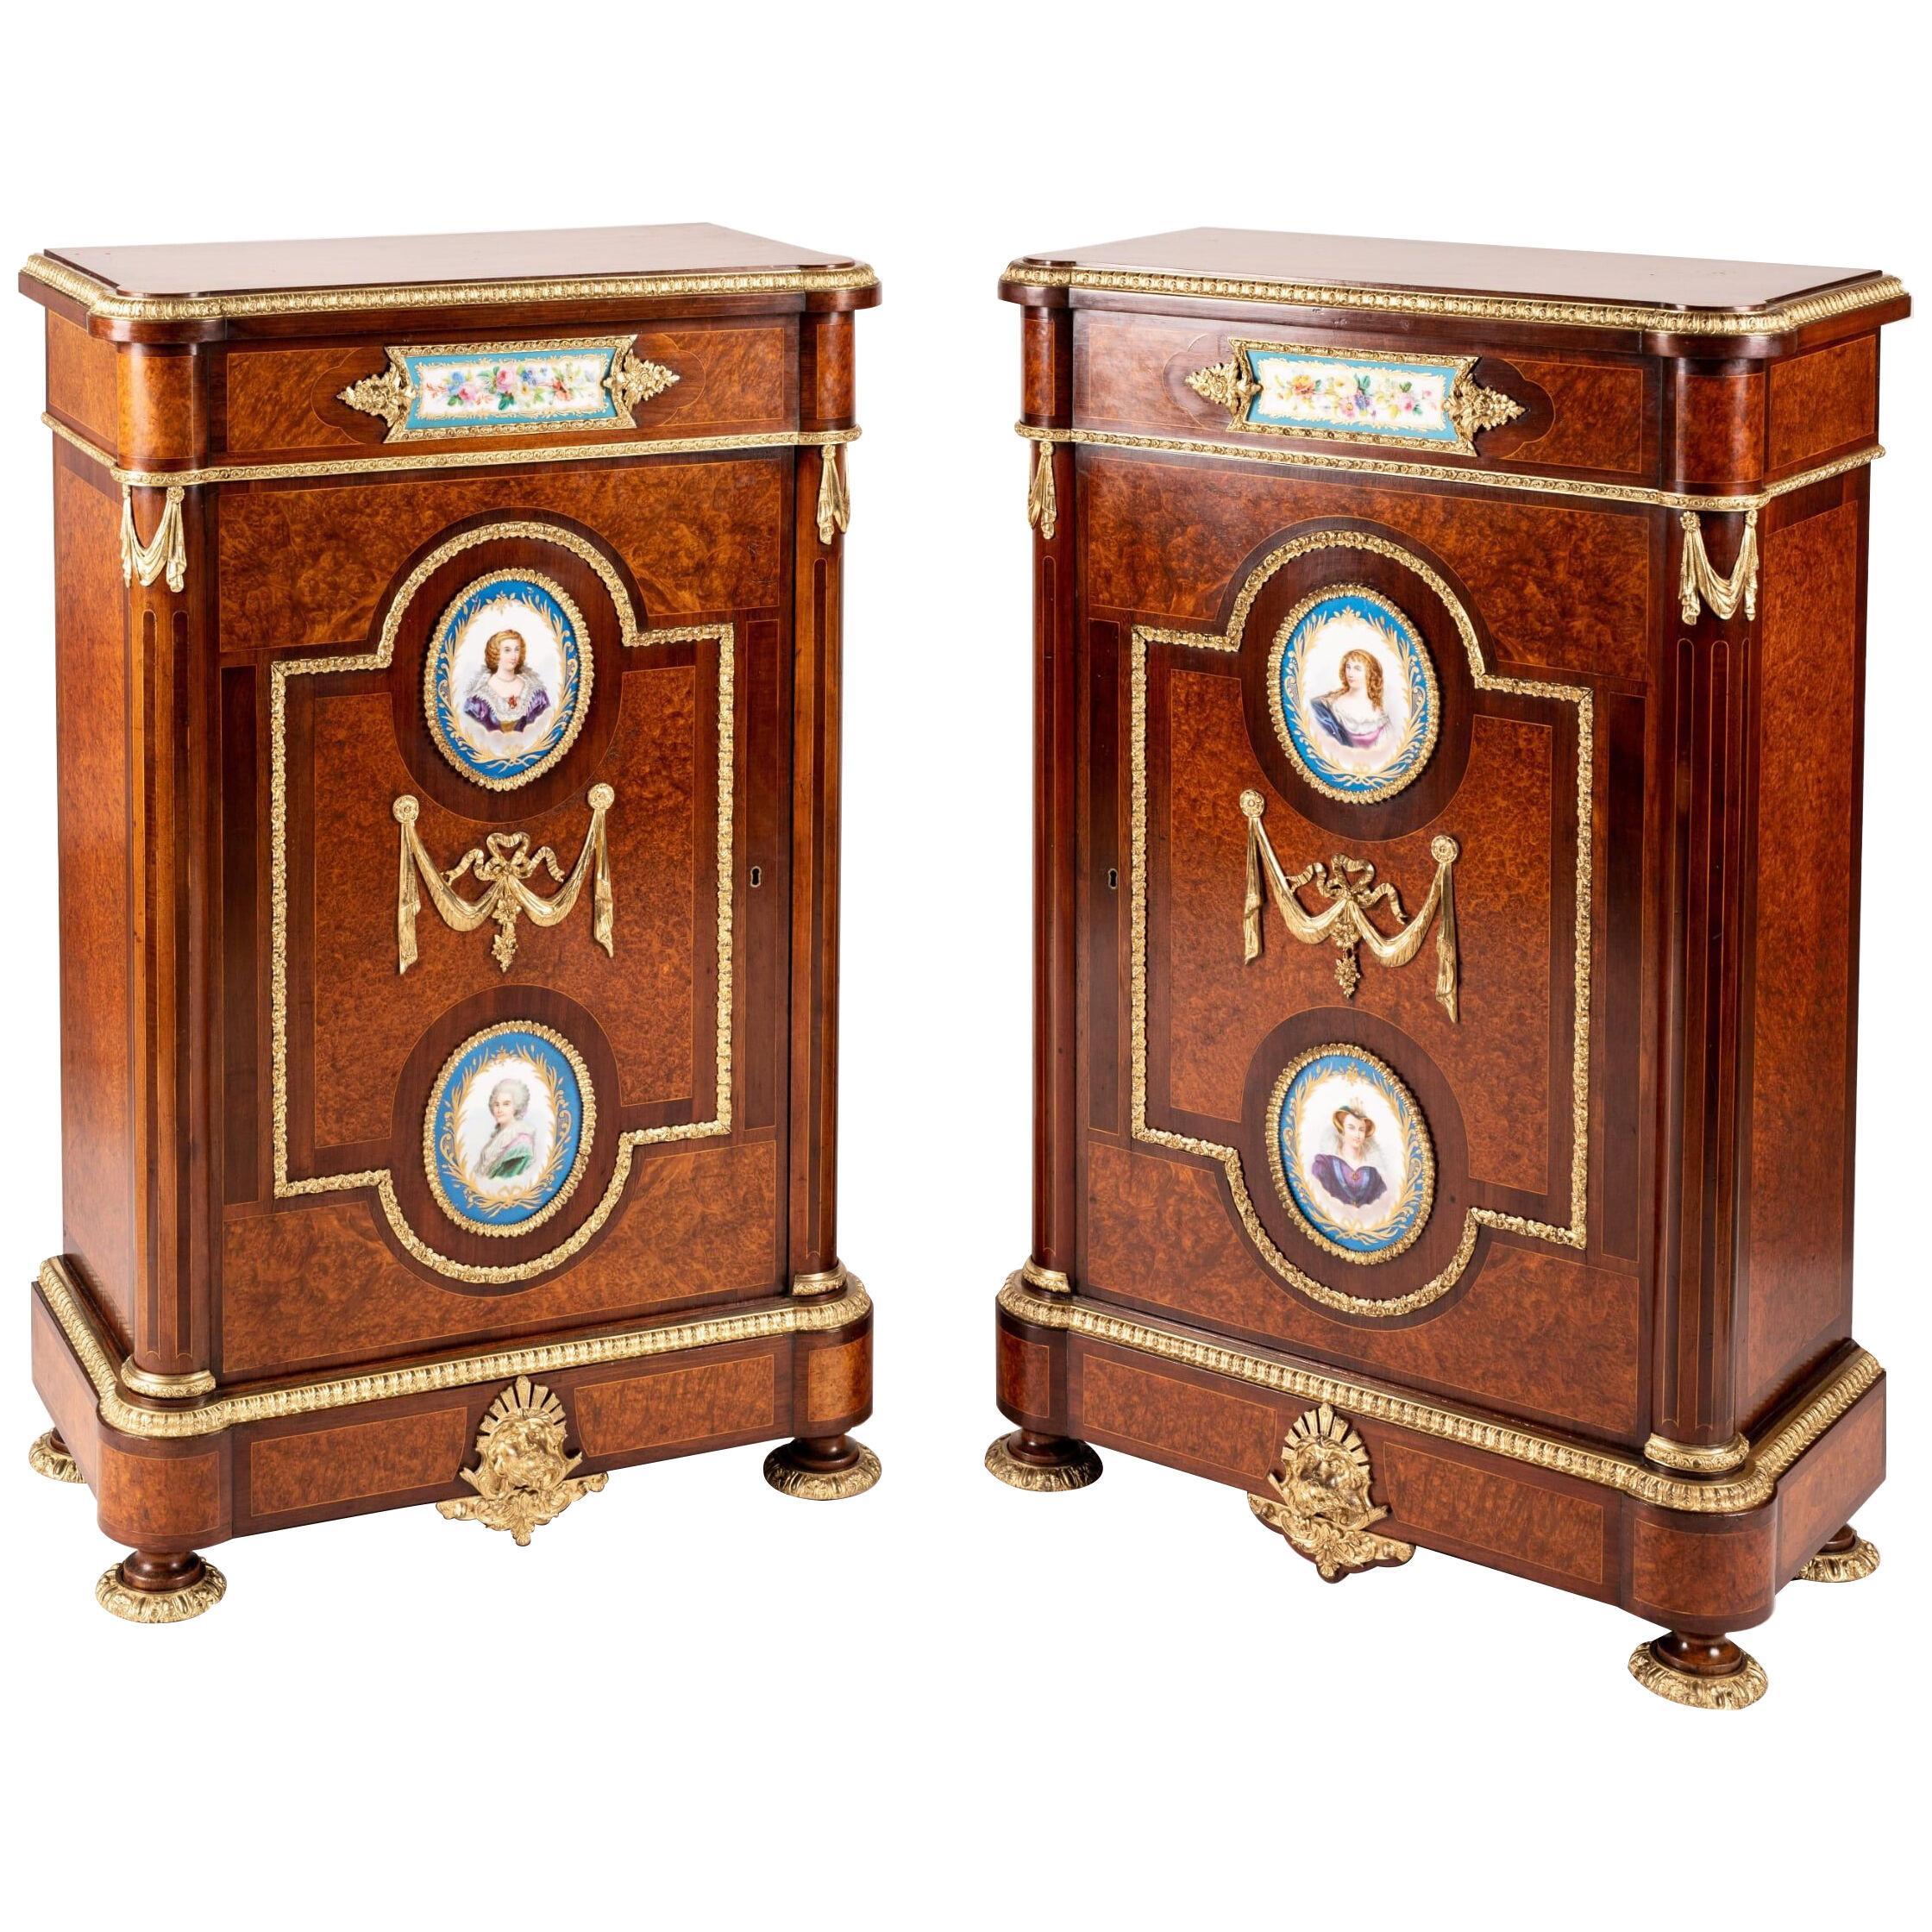 A Pair of 19th Century Porcelain-Mounted Pier Cabinets